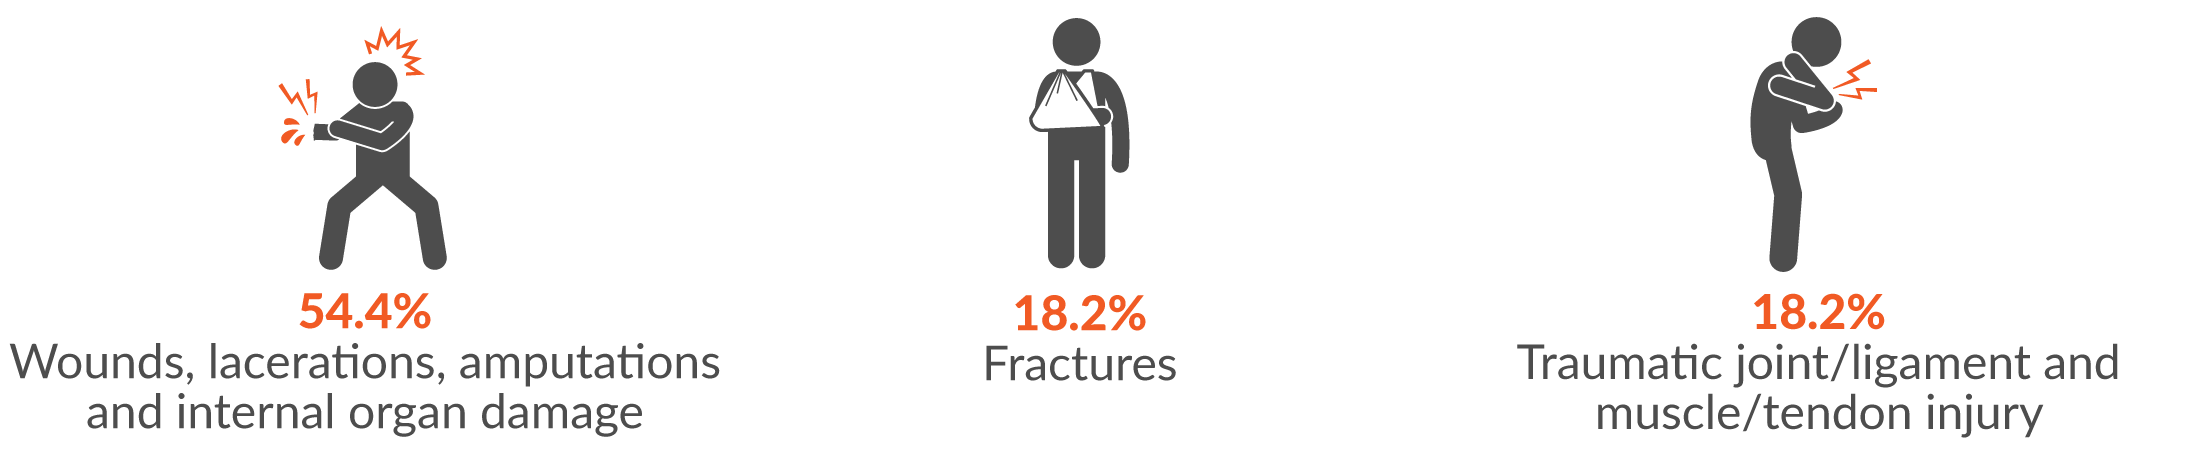 54.4% wounds, lacerations, amputations and internal organ damage; 18.2% fractures and 18.2% traumatic joint/ligament and muscle/tendon injury.